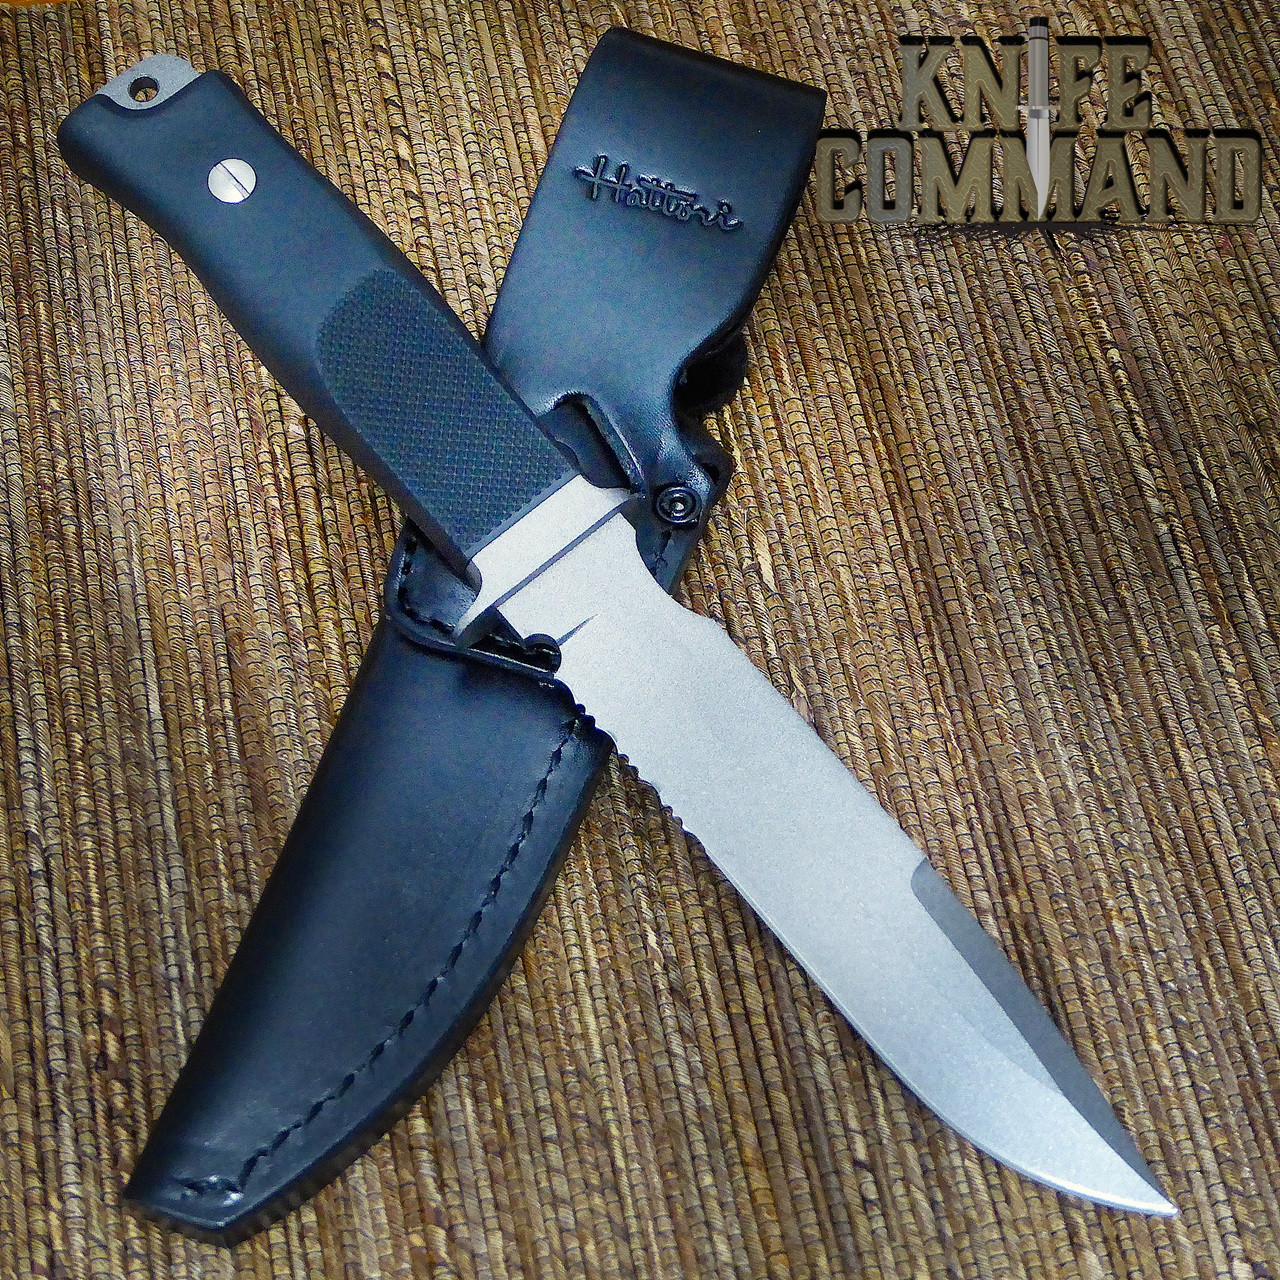 Hattori Knives Model S-51 Sea Commander Combat Military and Dive Knife.  High quality leather sheath.